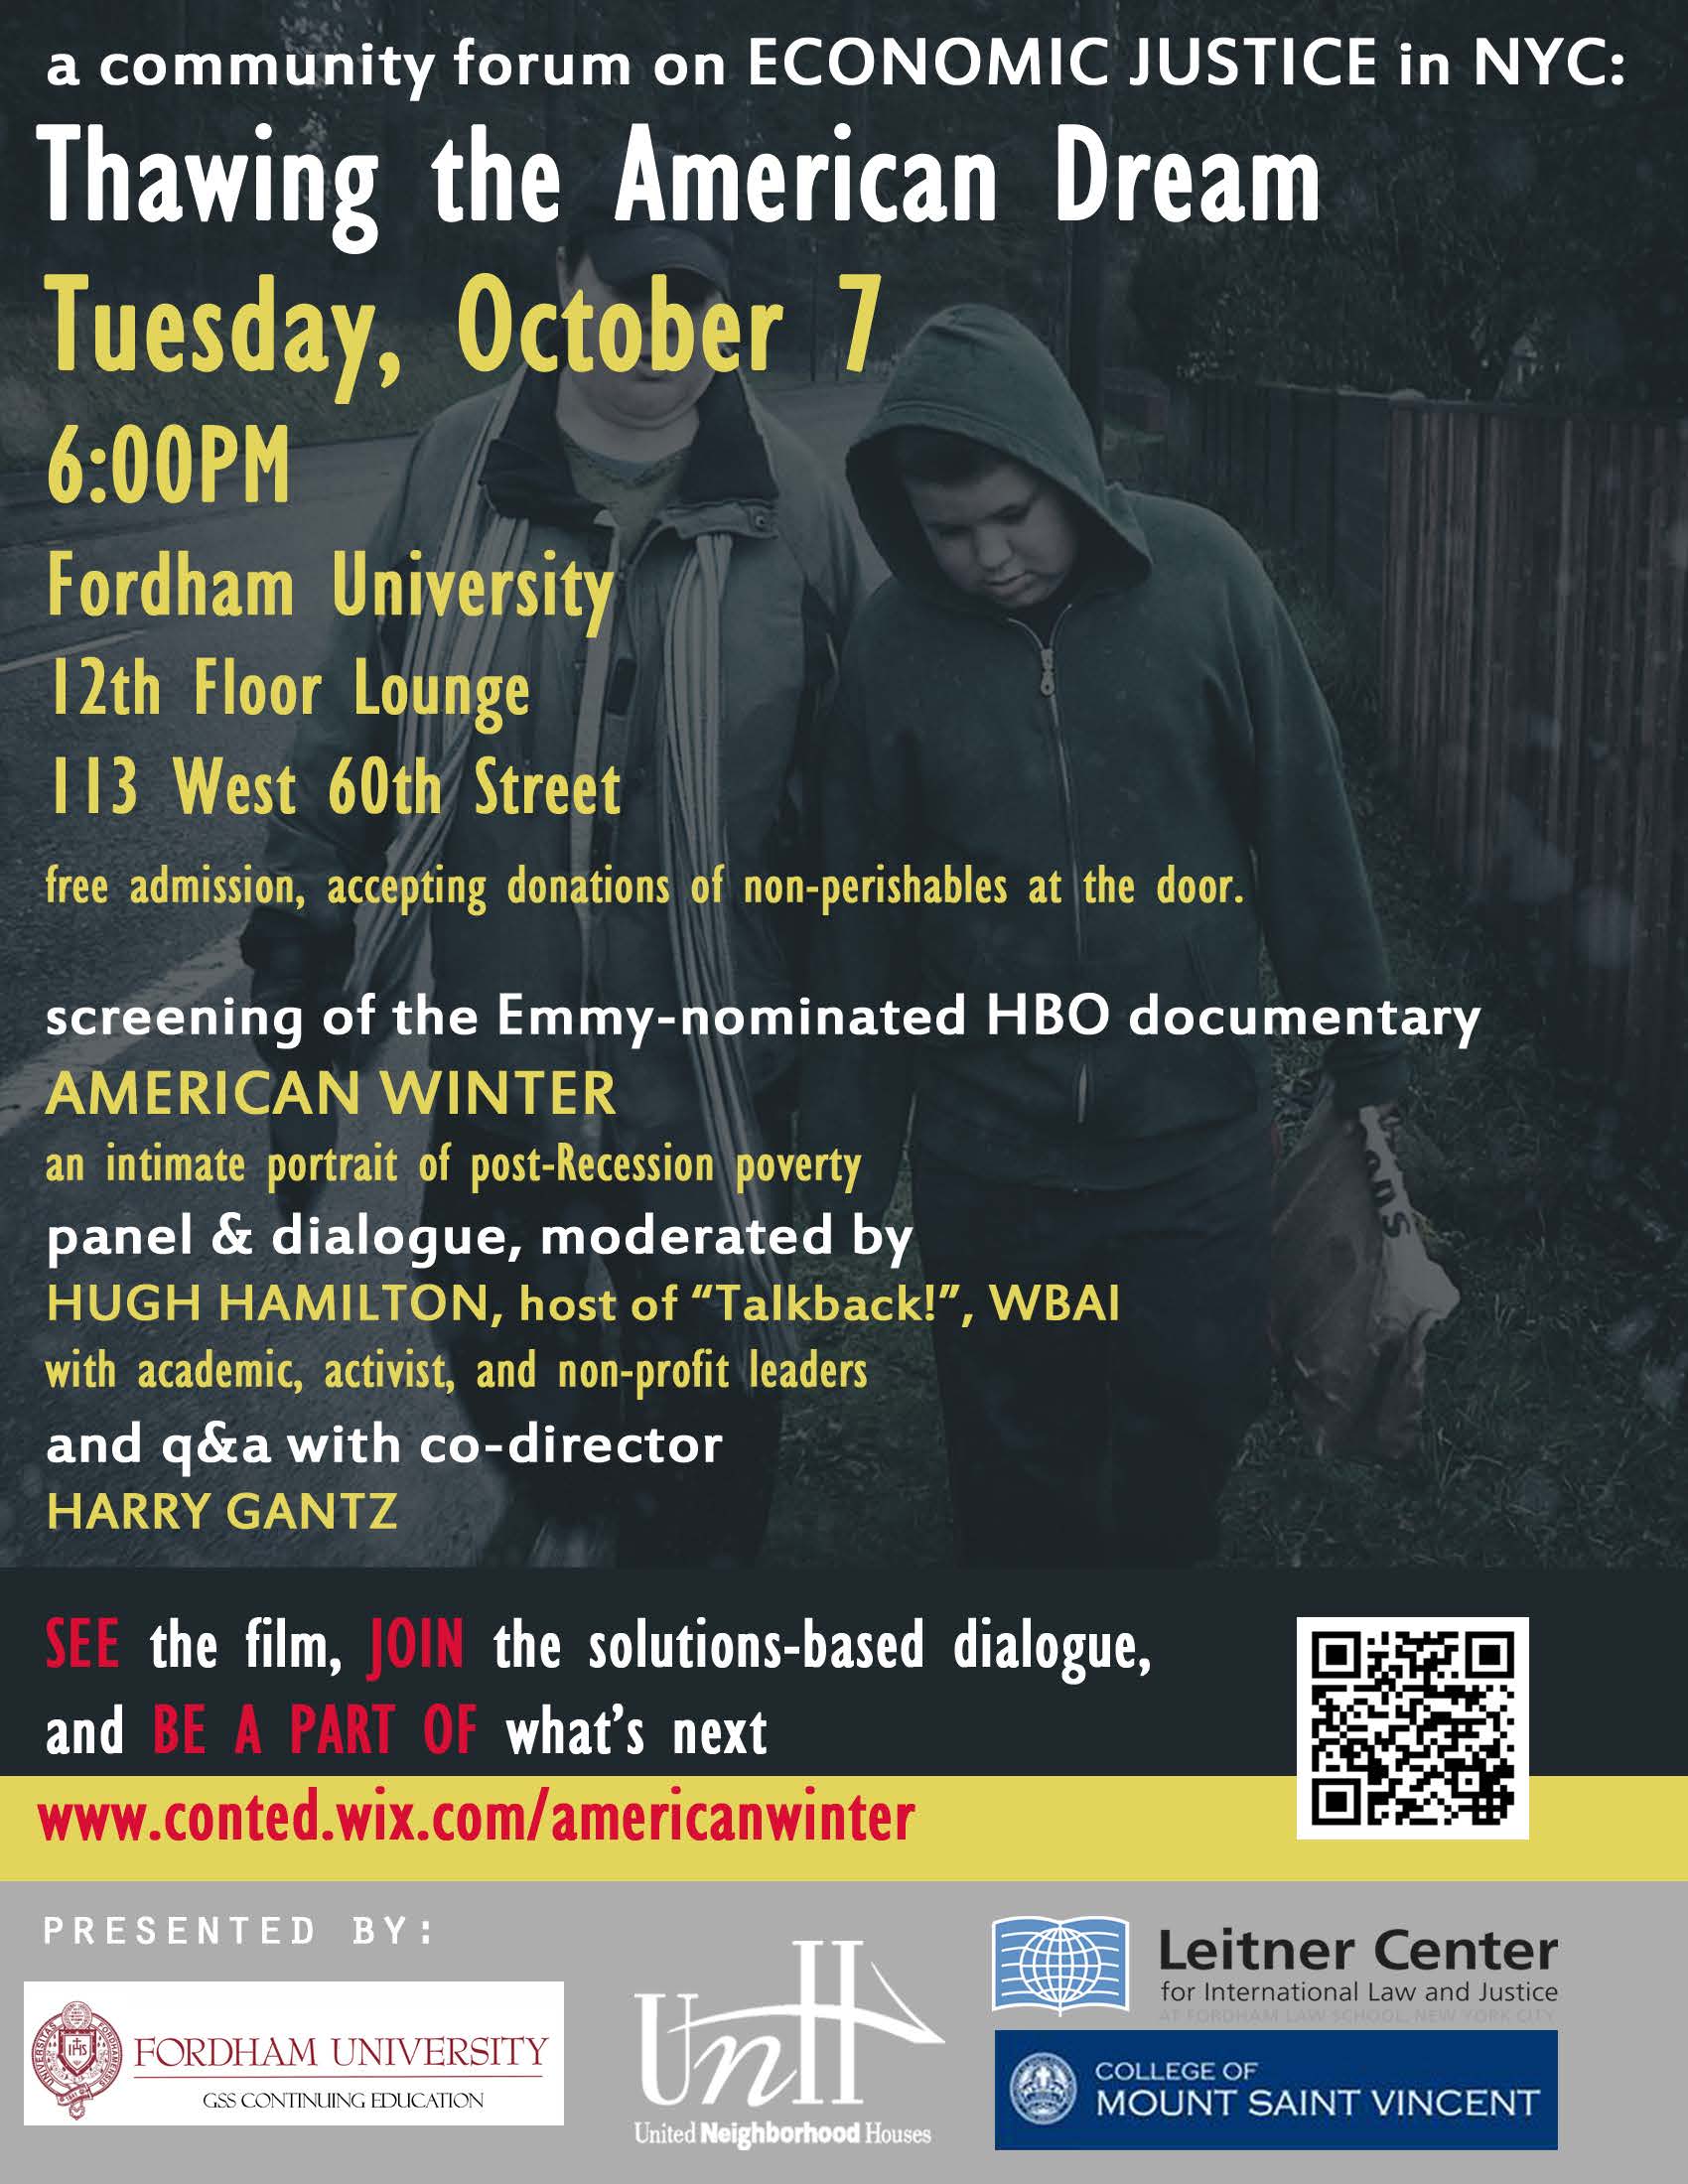 Film Screening and Community Forum on Economic Justice: Thawing the American Dream